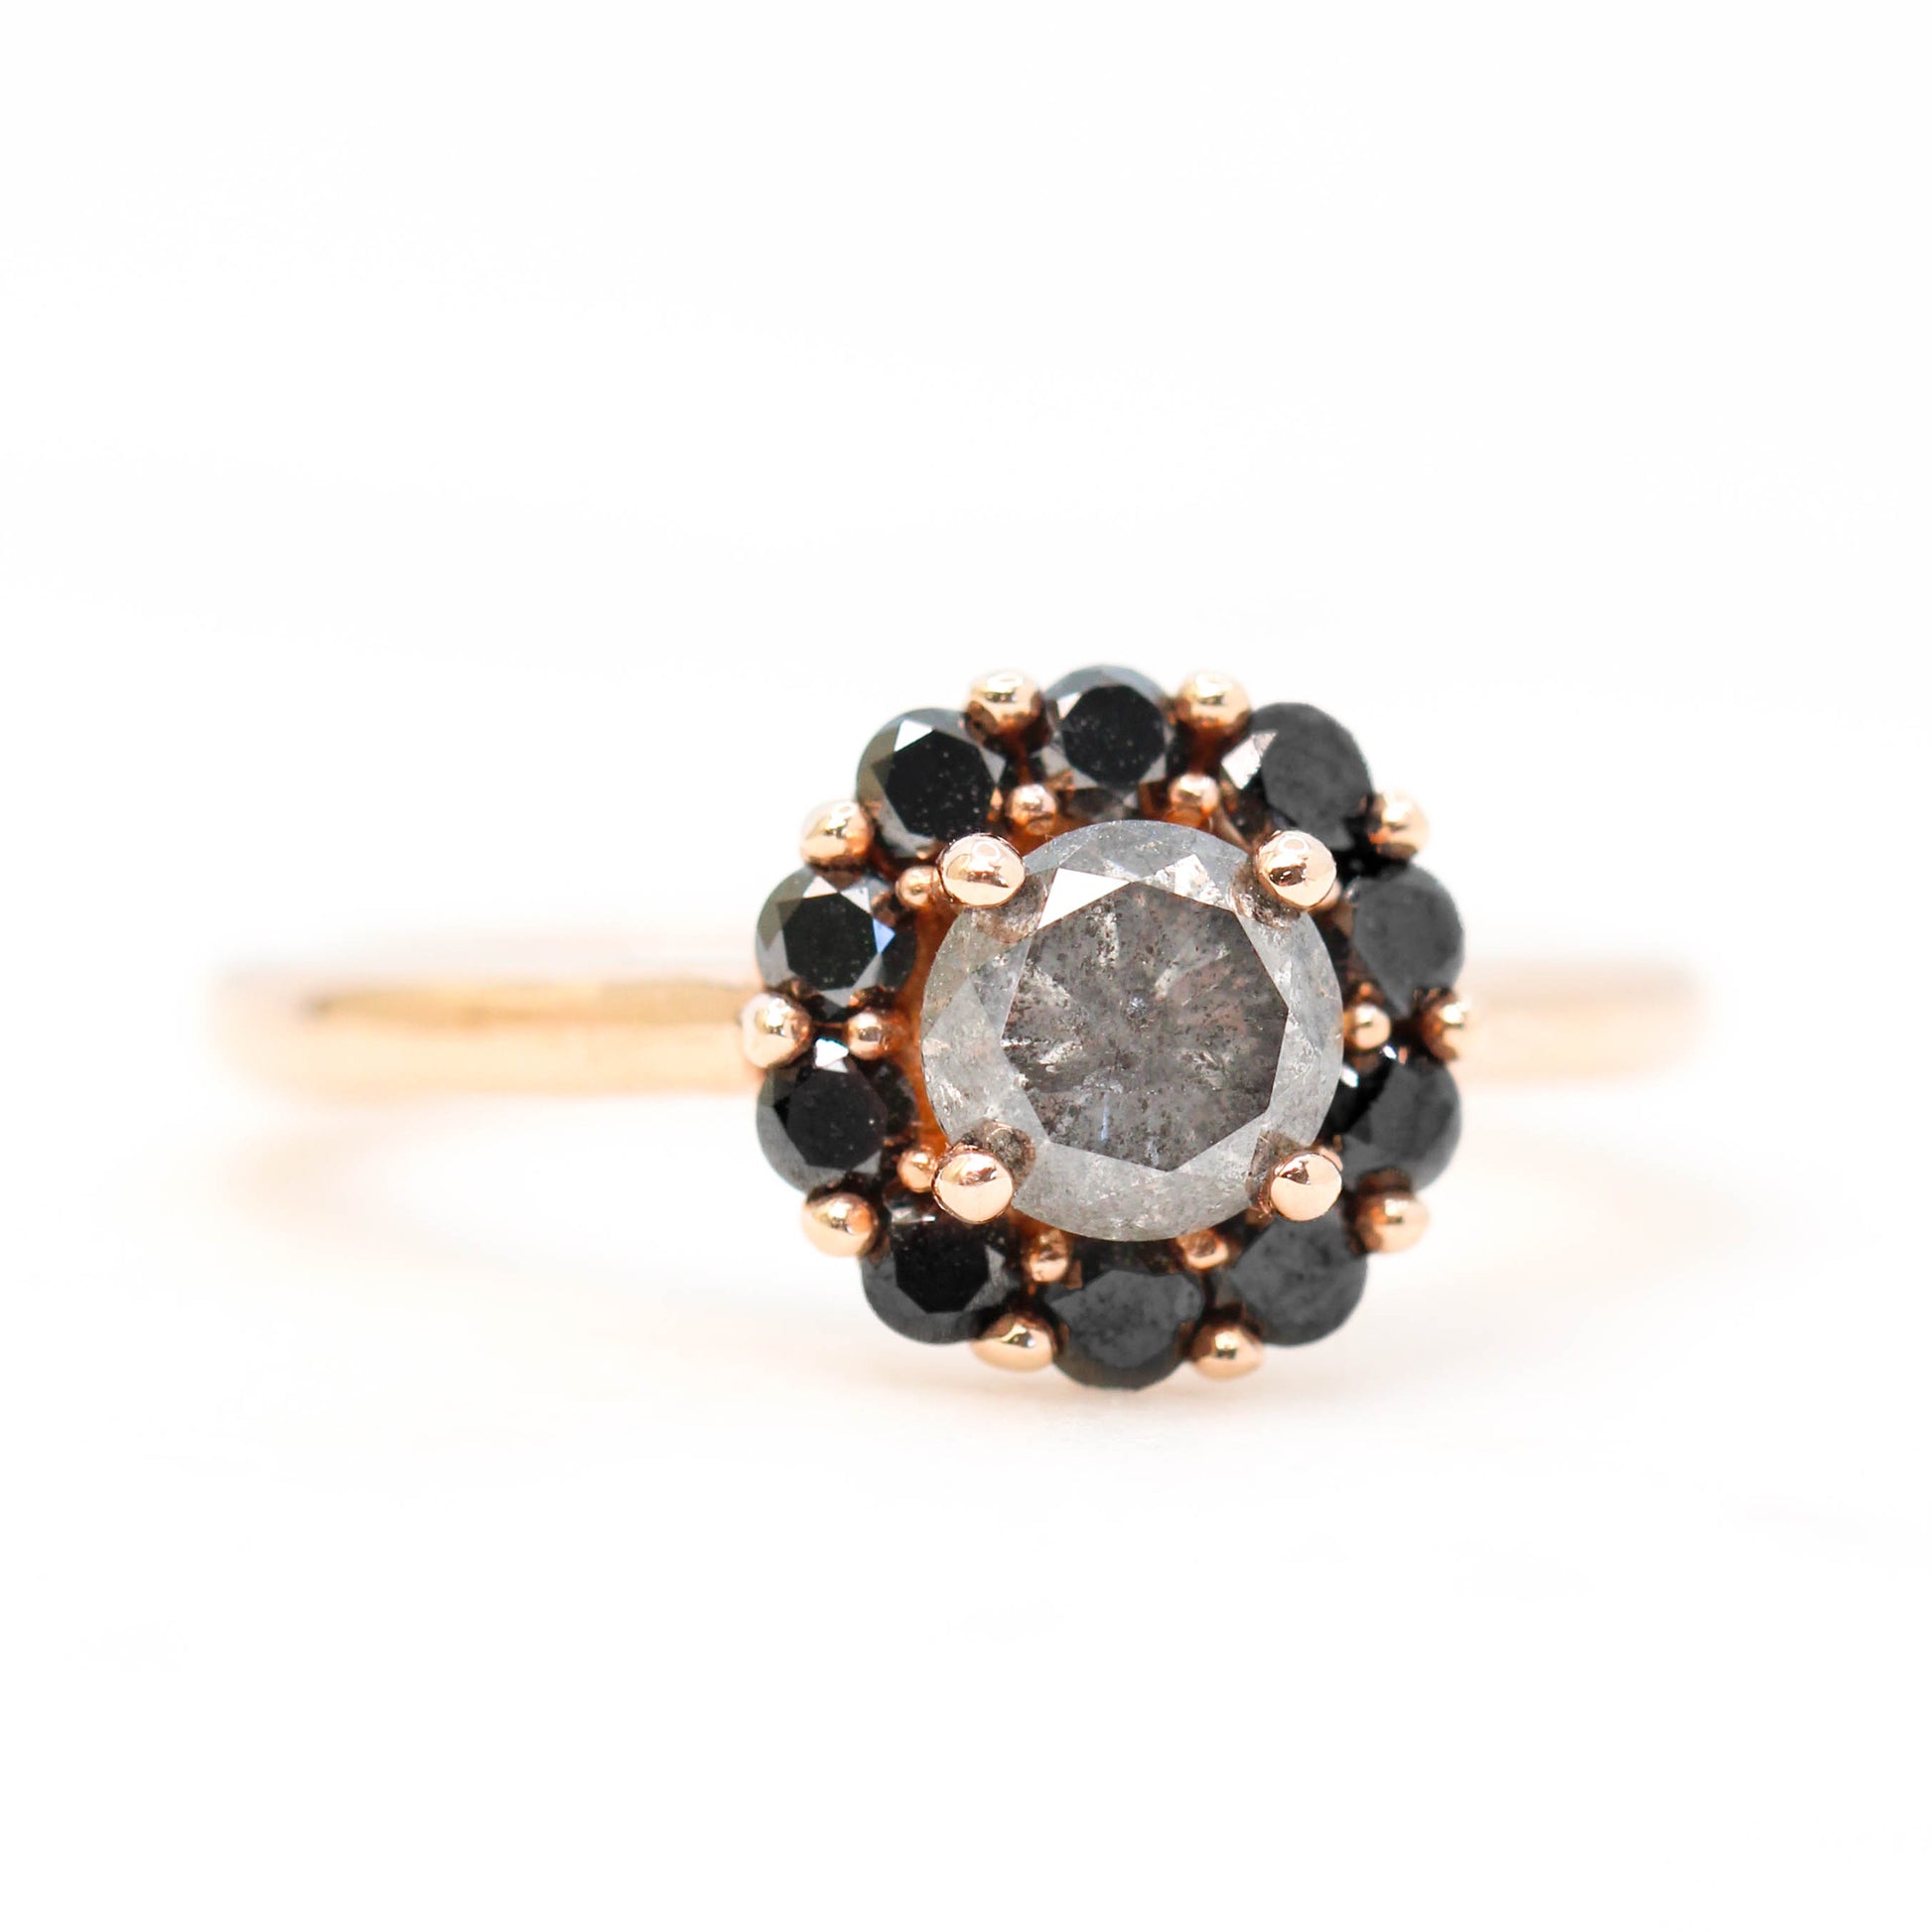 Magnolia Ring with a 1.02 Celestial Diamond and Black Diamond Accents in 14k Rose Gold - Ready to Size and Ship - Midwinter Co. Alternative Bridal Rings and Modern Fine Jewelry